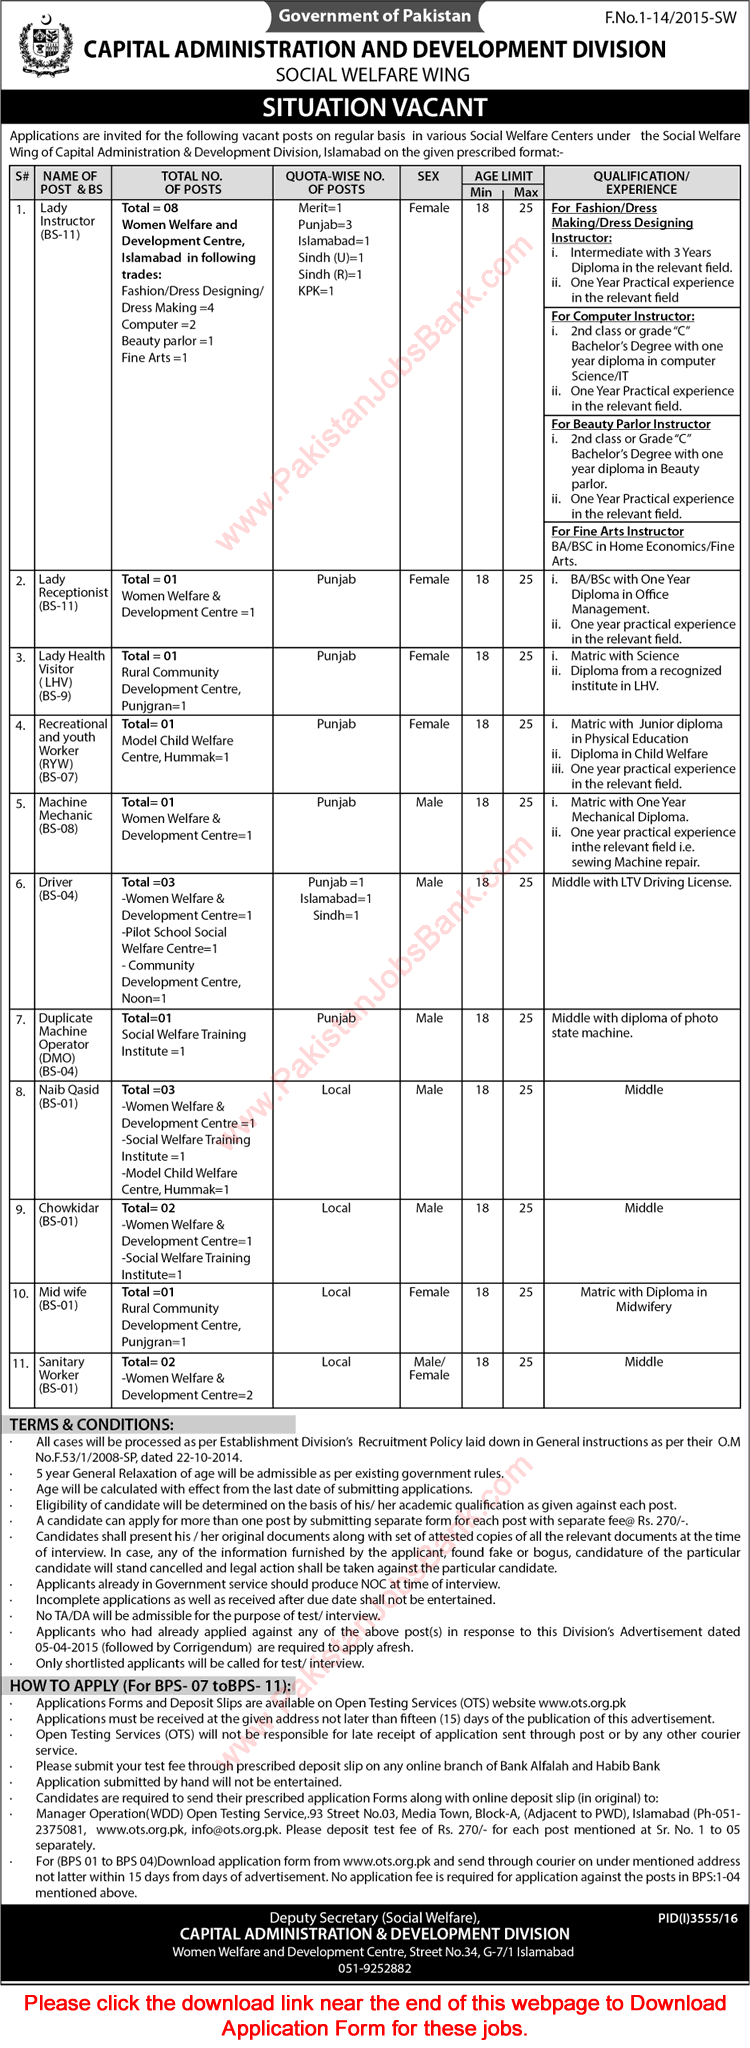 Capital Administration and Development Division Islamabad Jobs 2017 OTS Application Form Download Latest